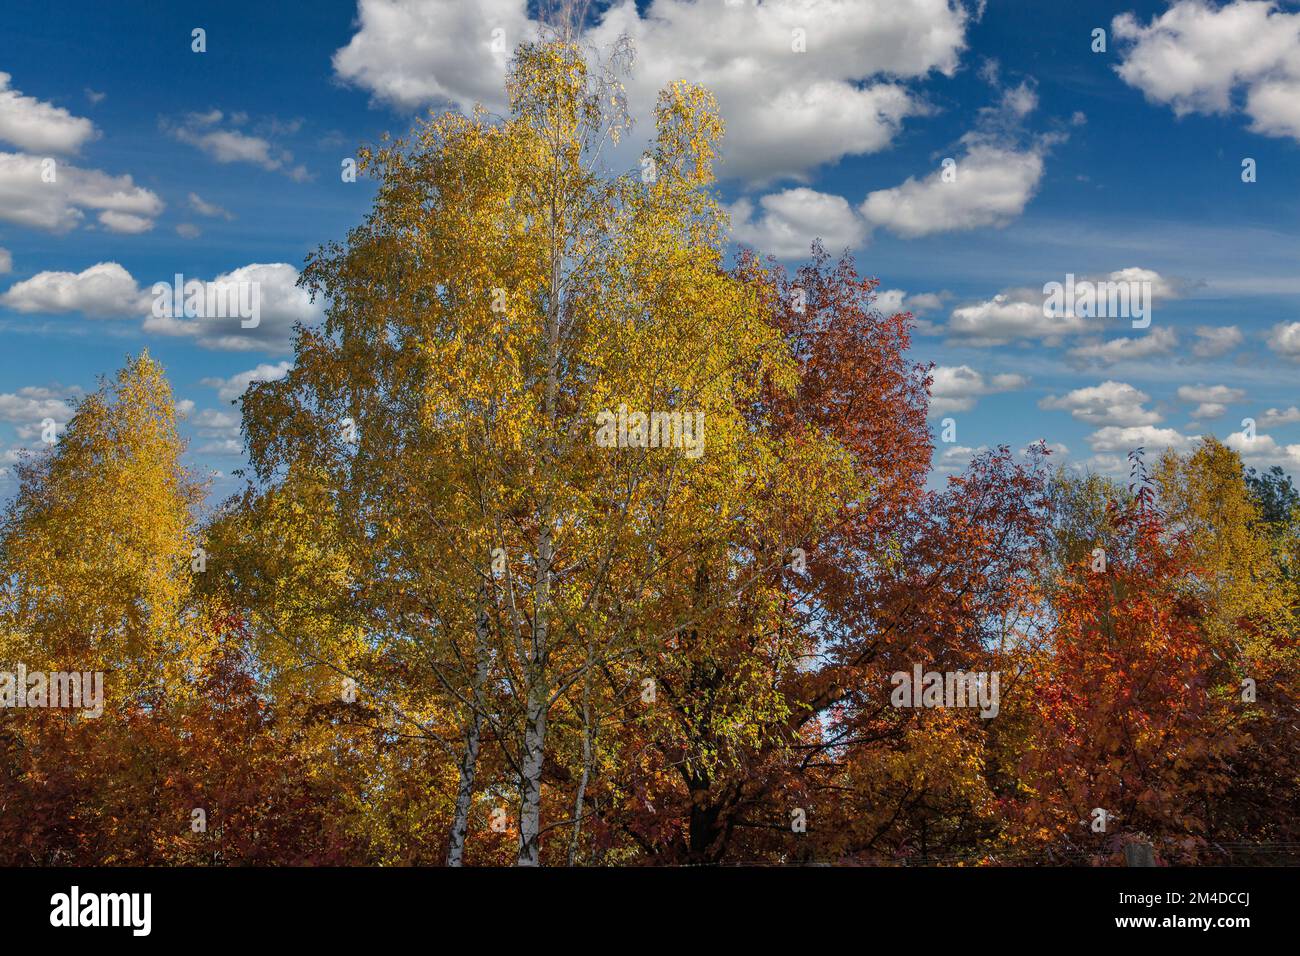 Landscape autumn forest trees against white clouds at sunny day Stock Photo